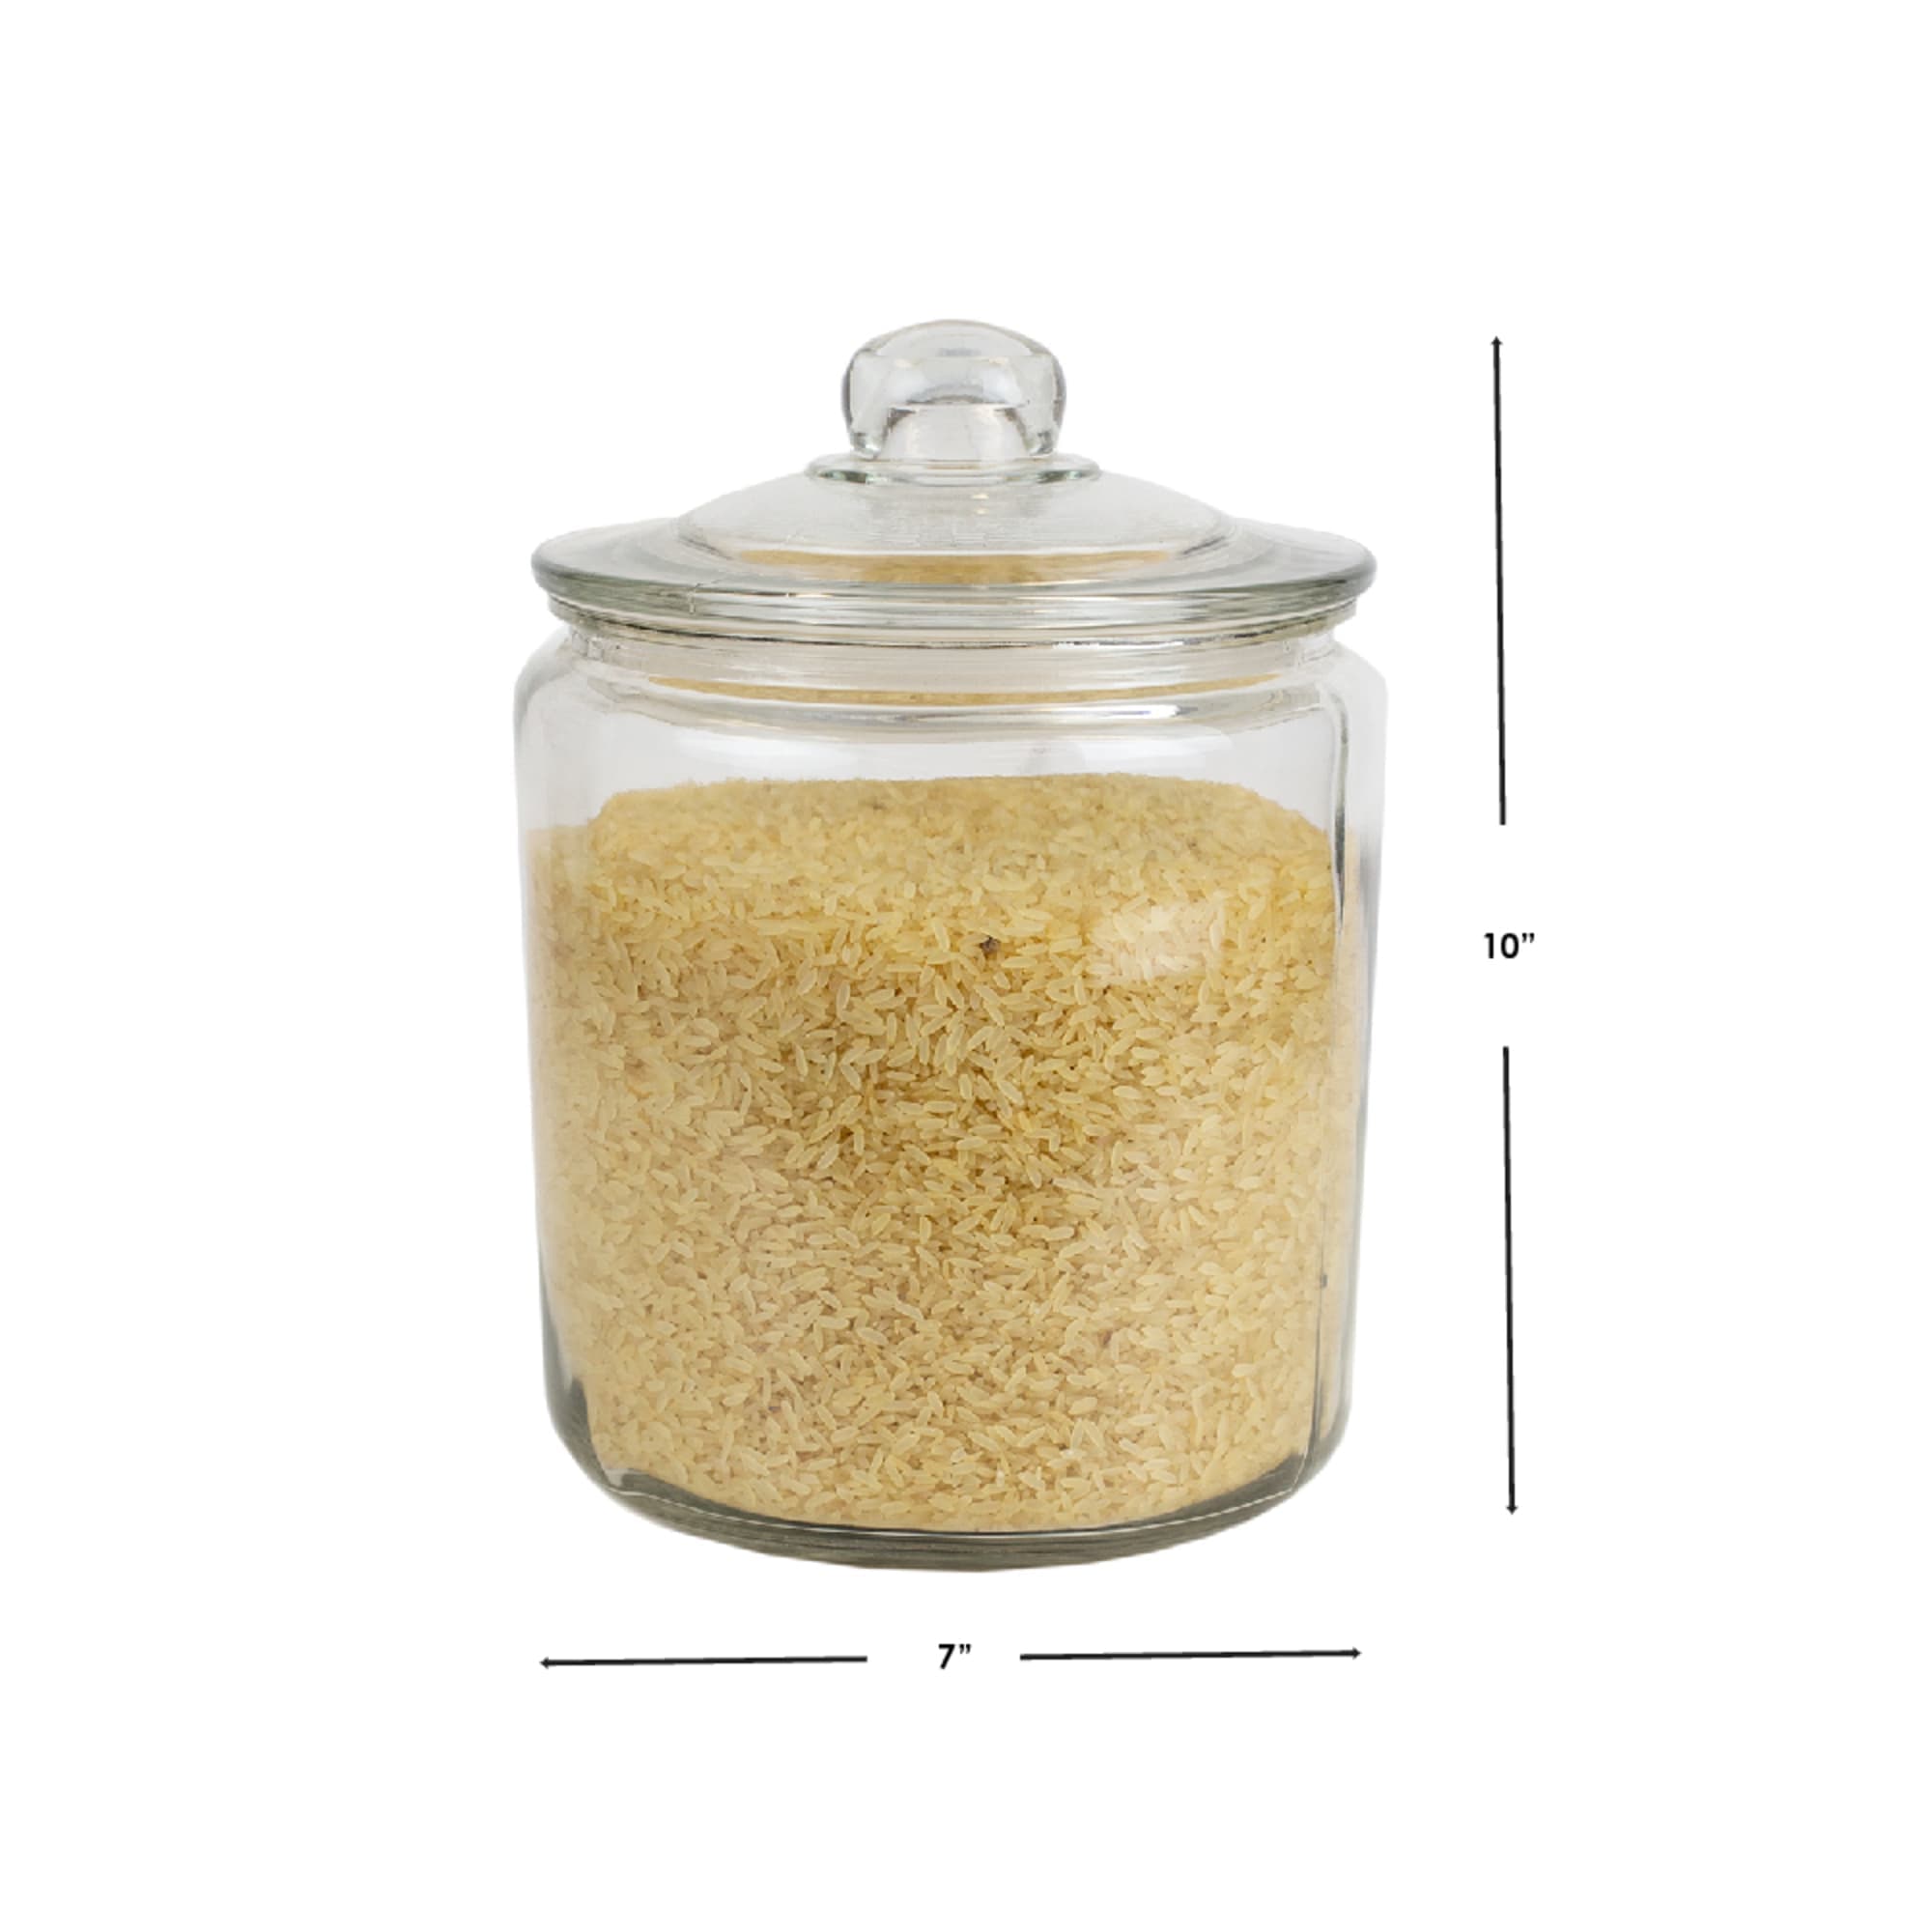 Home Basics Renaissance Collection Large 4 Lt Glass Jar with Easy Grab Knob Handles, Clear $6.00 EACH, CASE PACK OF 6